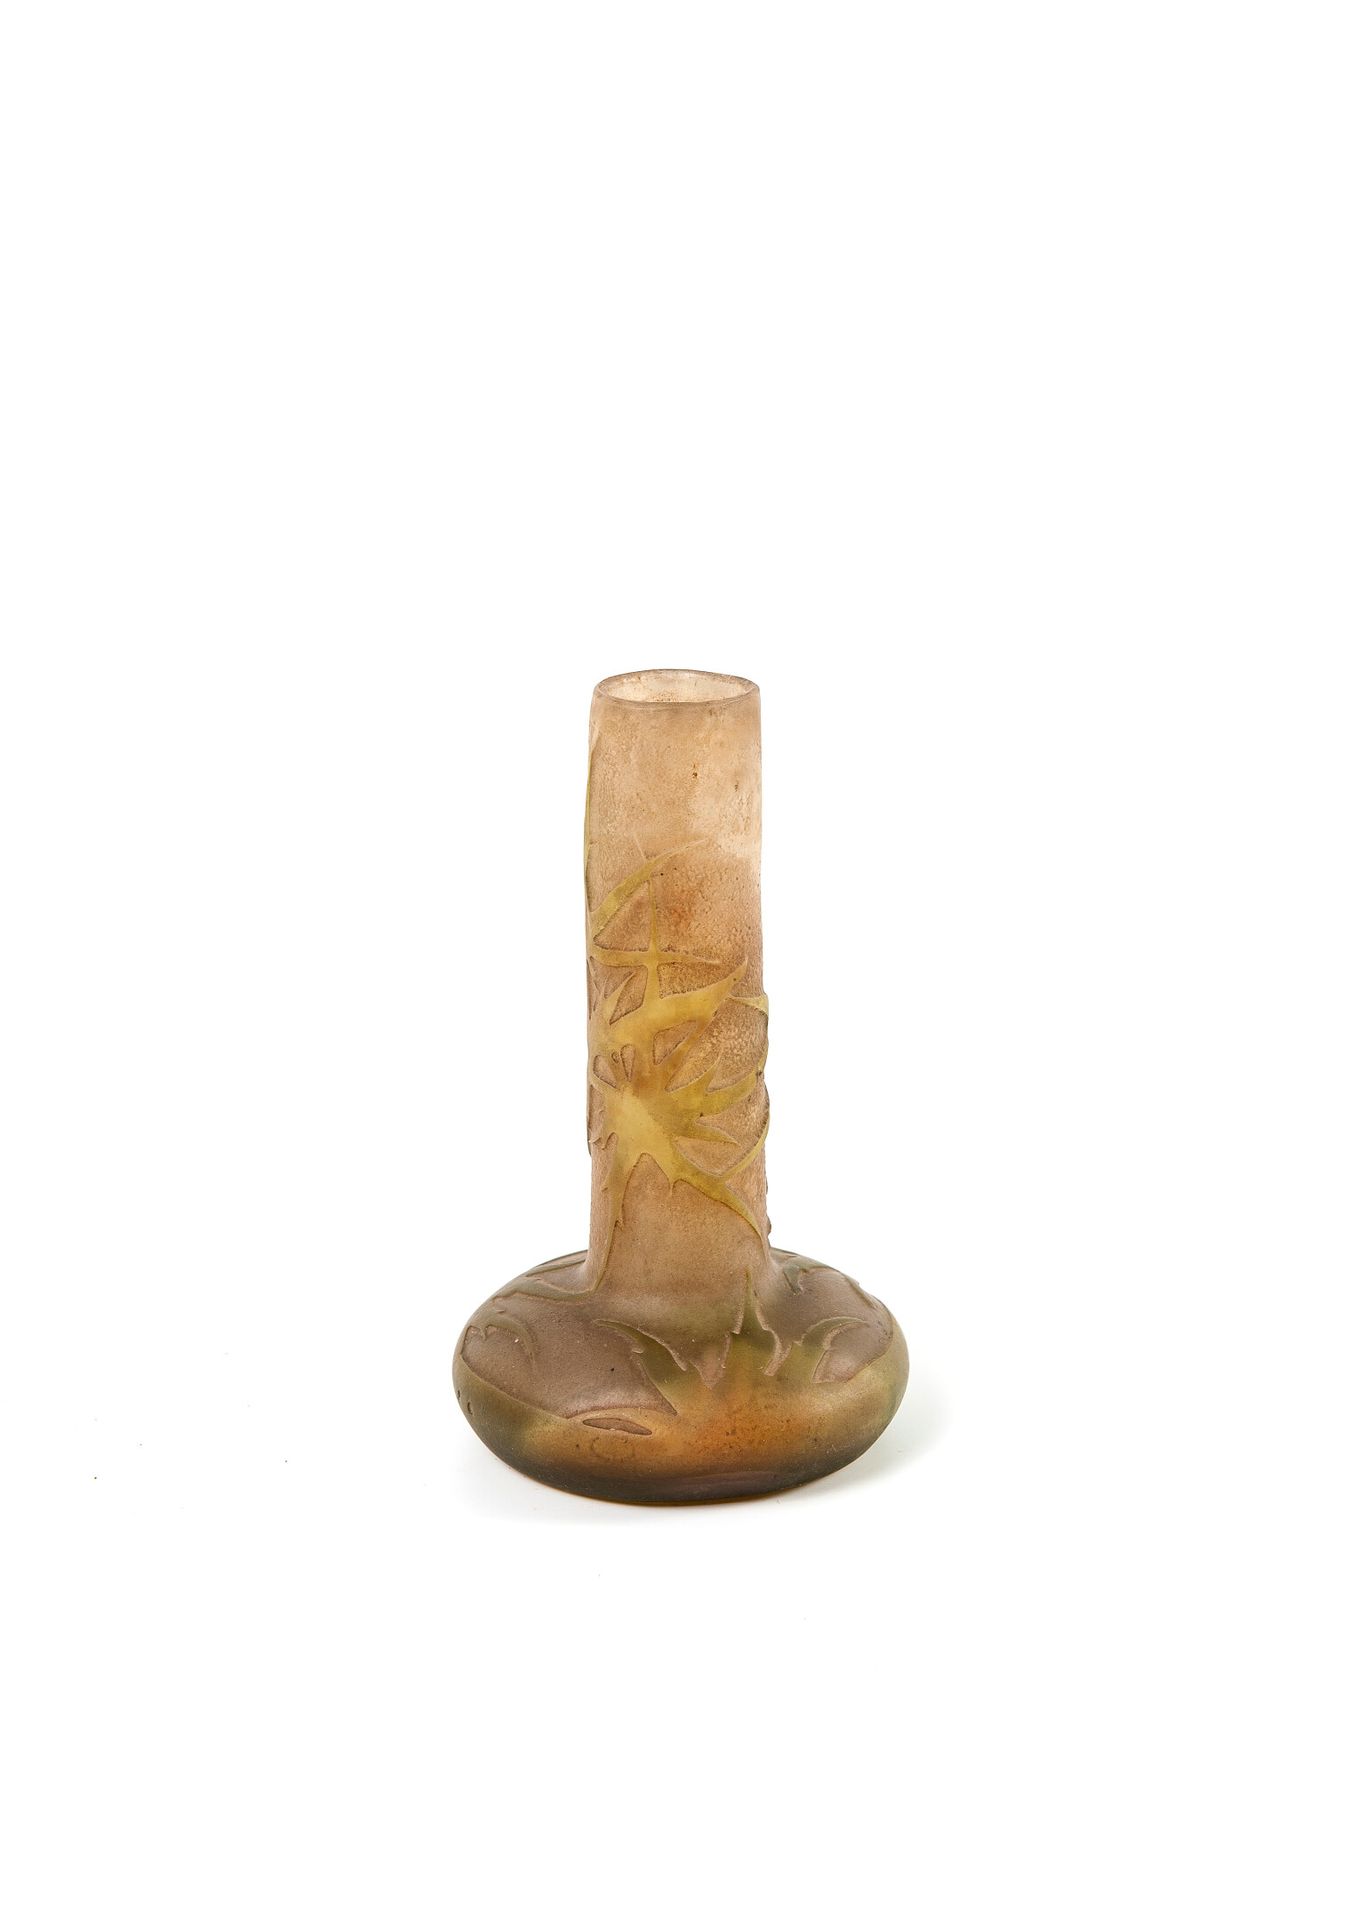 ÉTABLISSEMENTS GALLÉ Small soliflore vase with tubular neck on flattened body an&hellip;